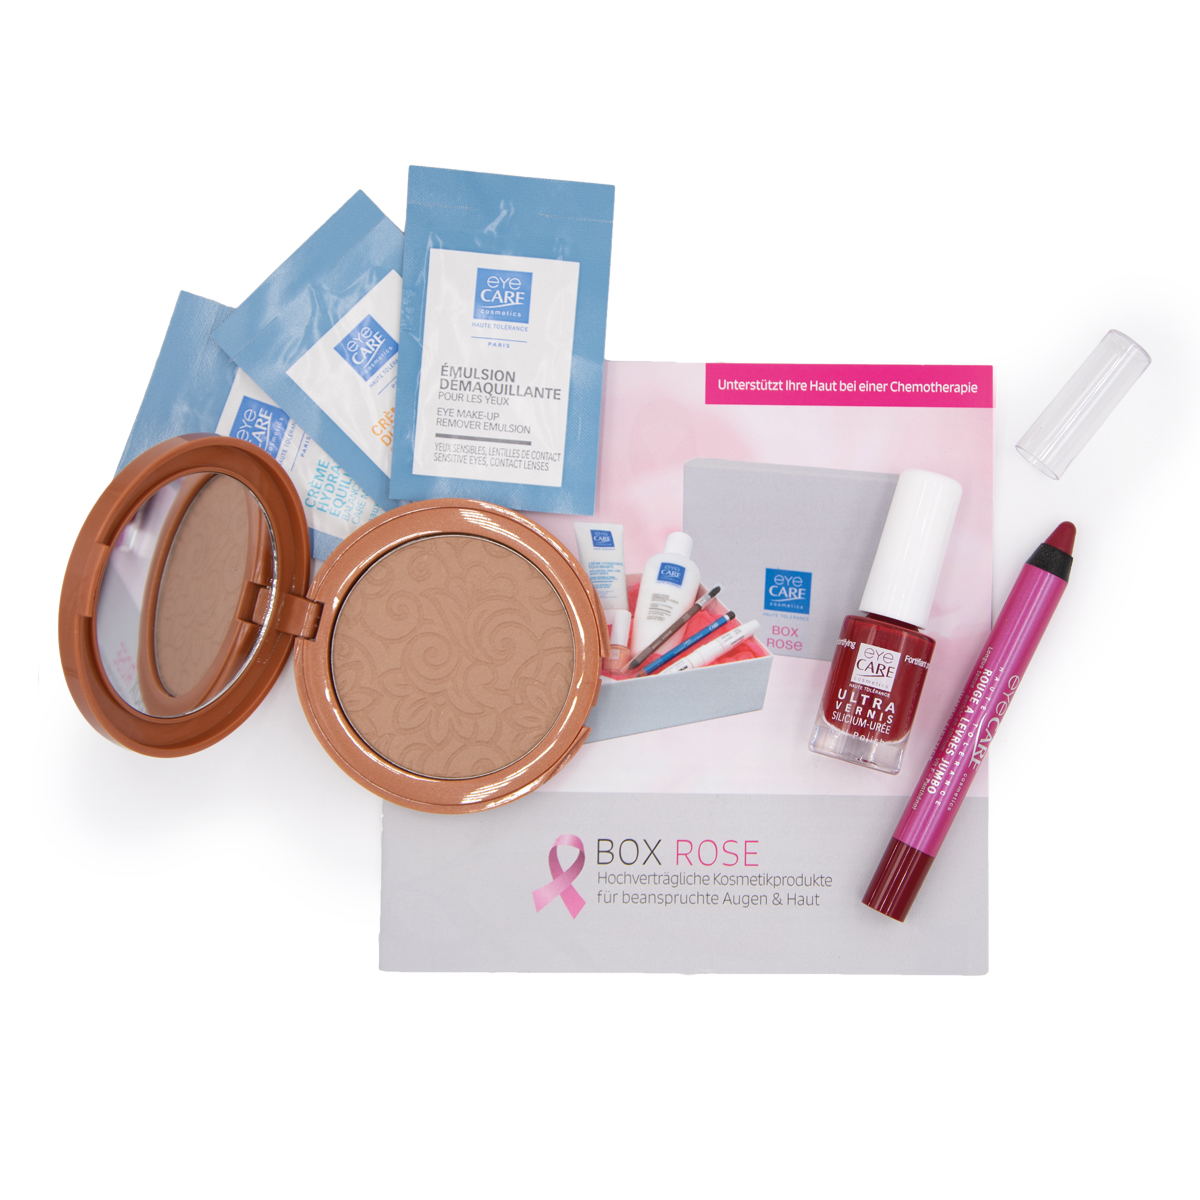 Featured image for “eyeCARE Box Rose Beauty Bag”